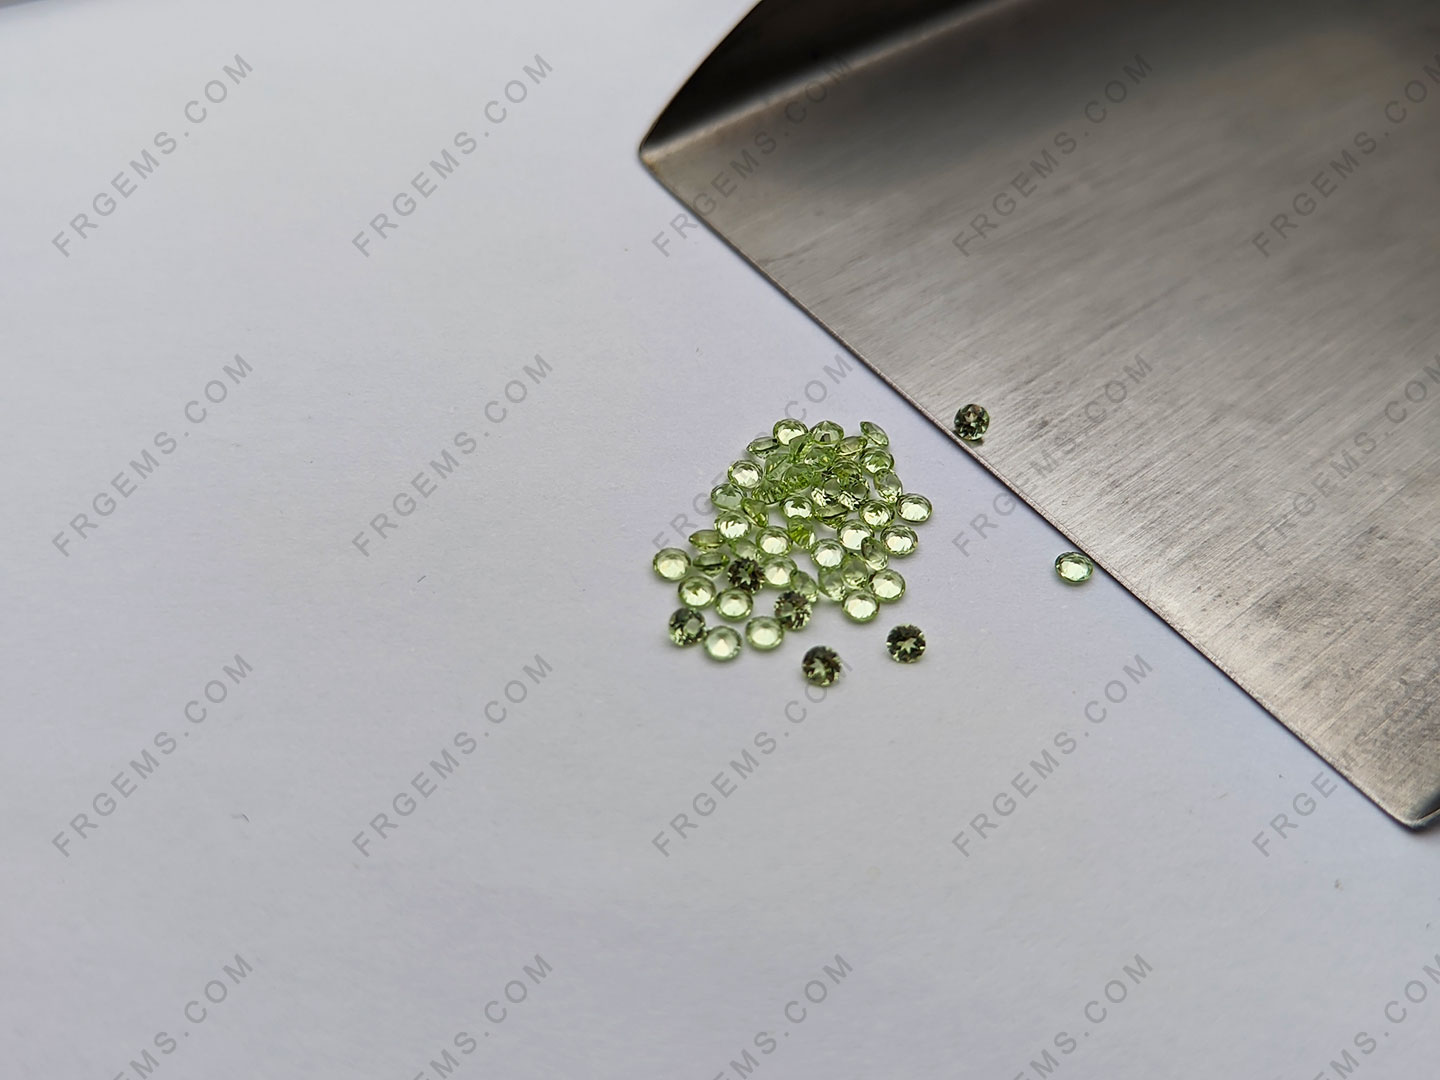 Loose Natural genuine Peridot Color Round faceted 2mm Gemstones wholesale from China Supplier